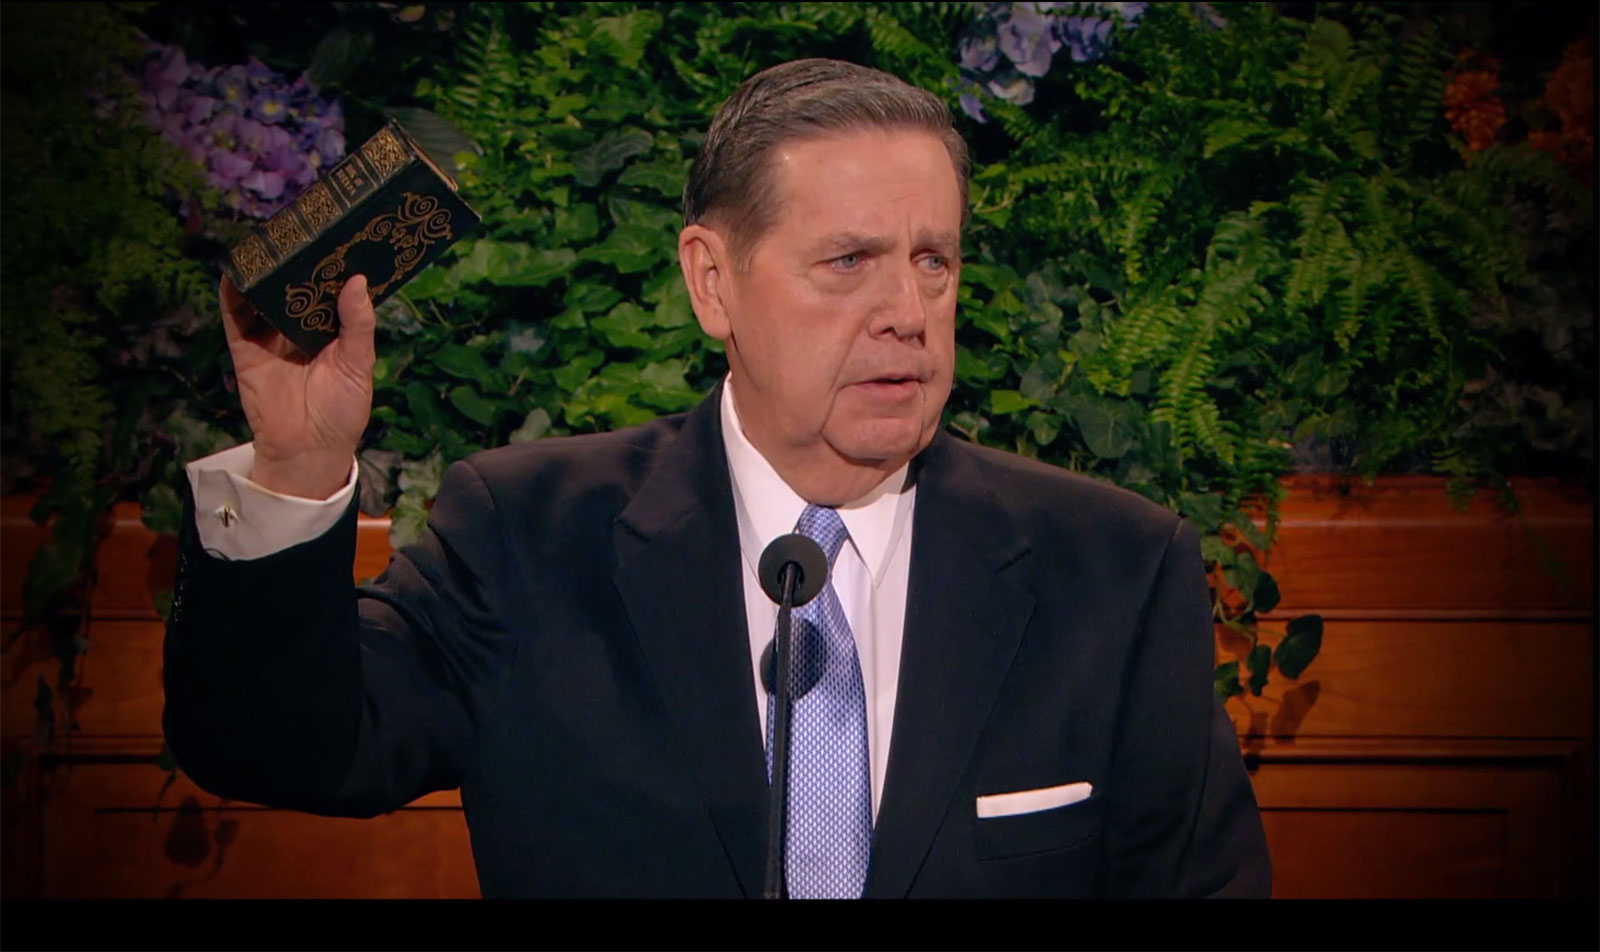 Jeffrey R. Holland, in a black suit, white shirt and light blue tie, stands at the pulpit in the conference center and holds up a copy of The Book of Mormon once owned by Hyrum Smith.